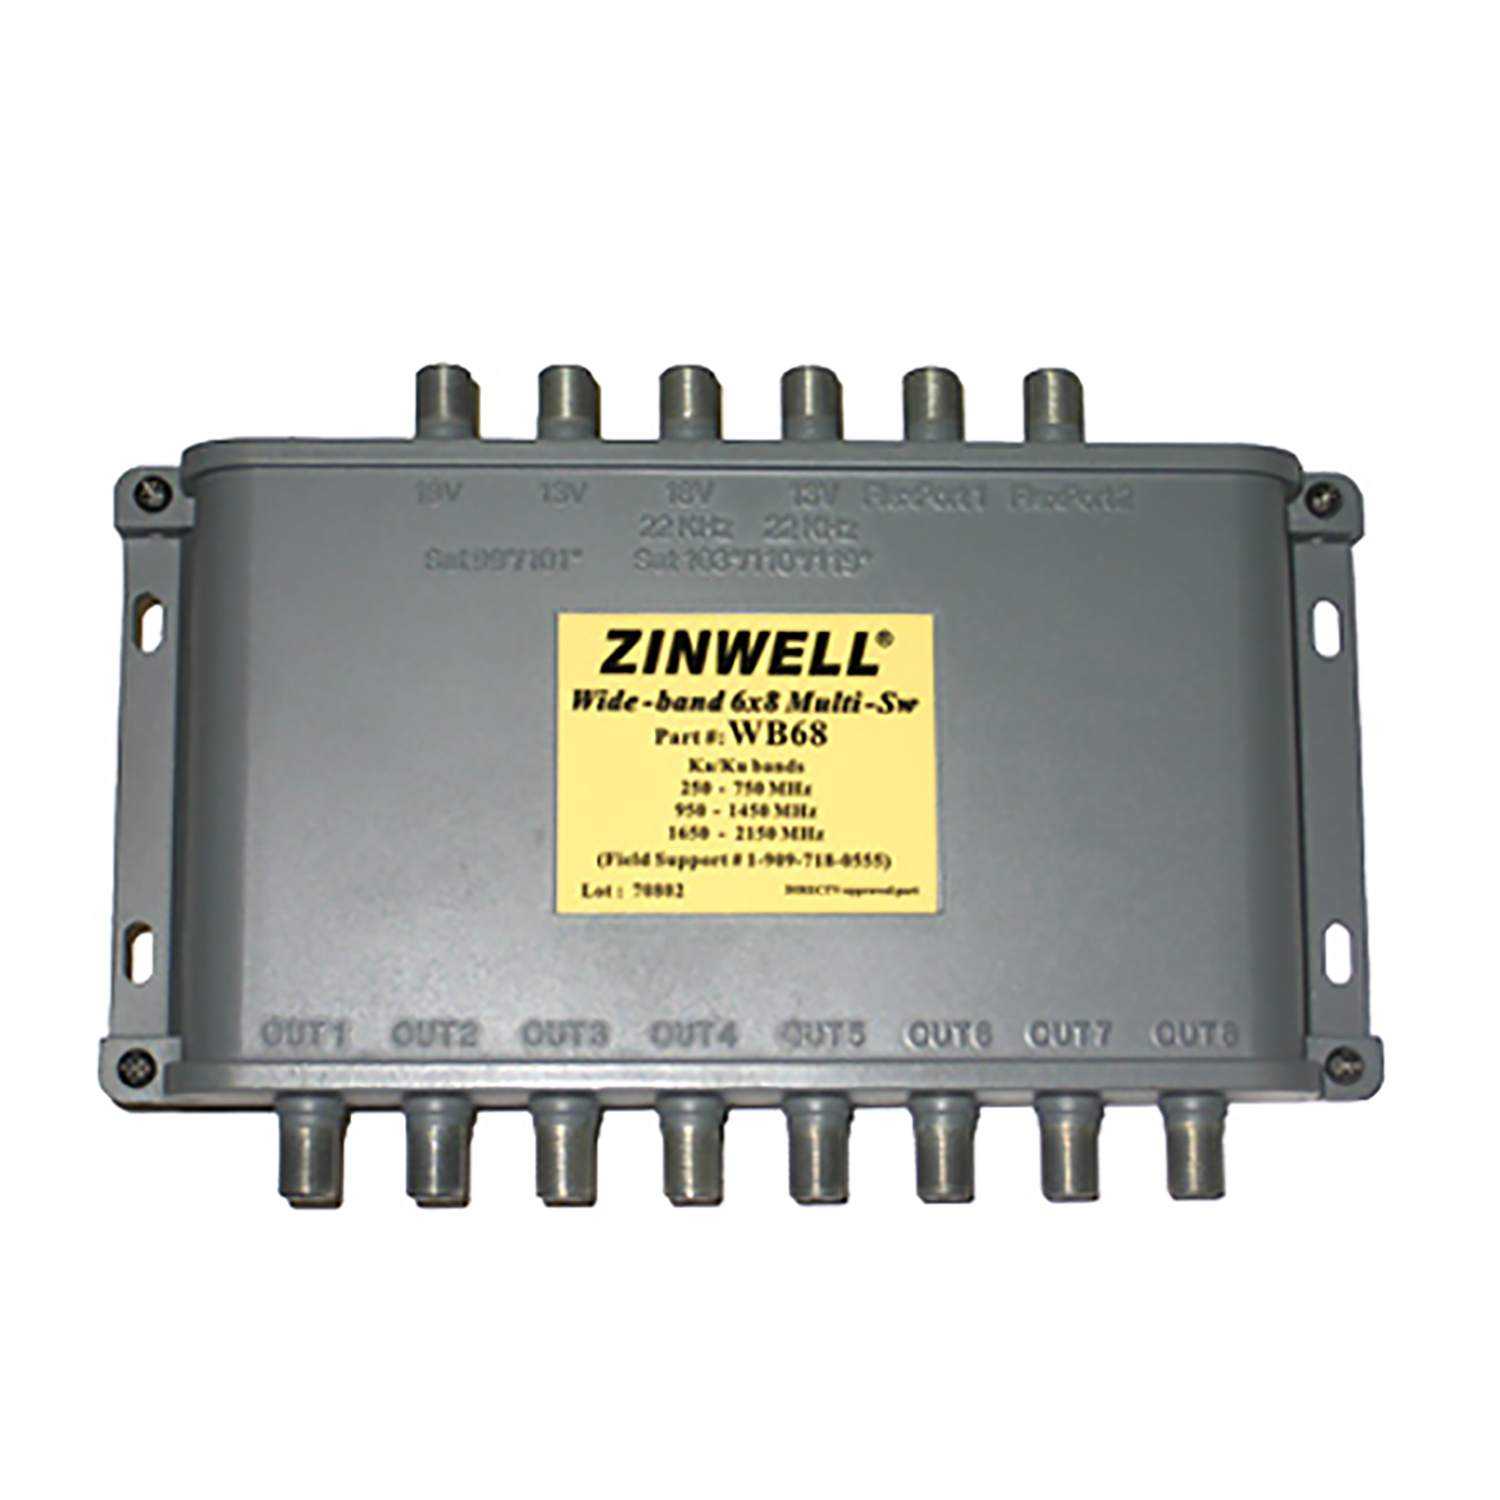 Generic DirecTV 6x8 Multiswitch With Weather Boot [ms6x8wb]